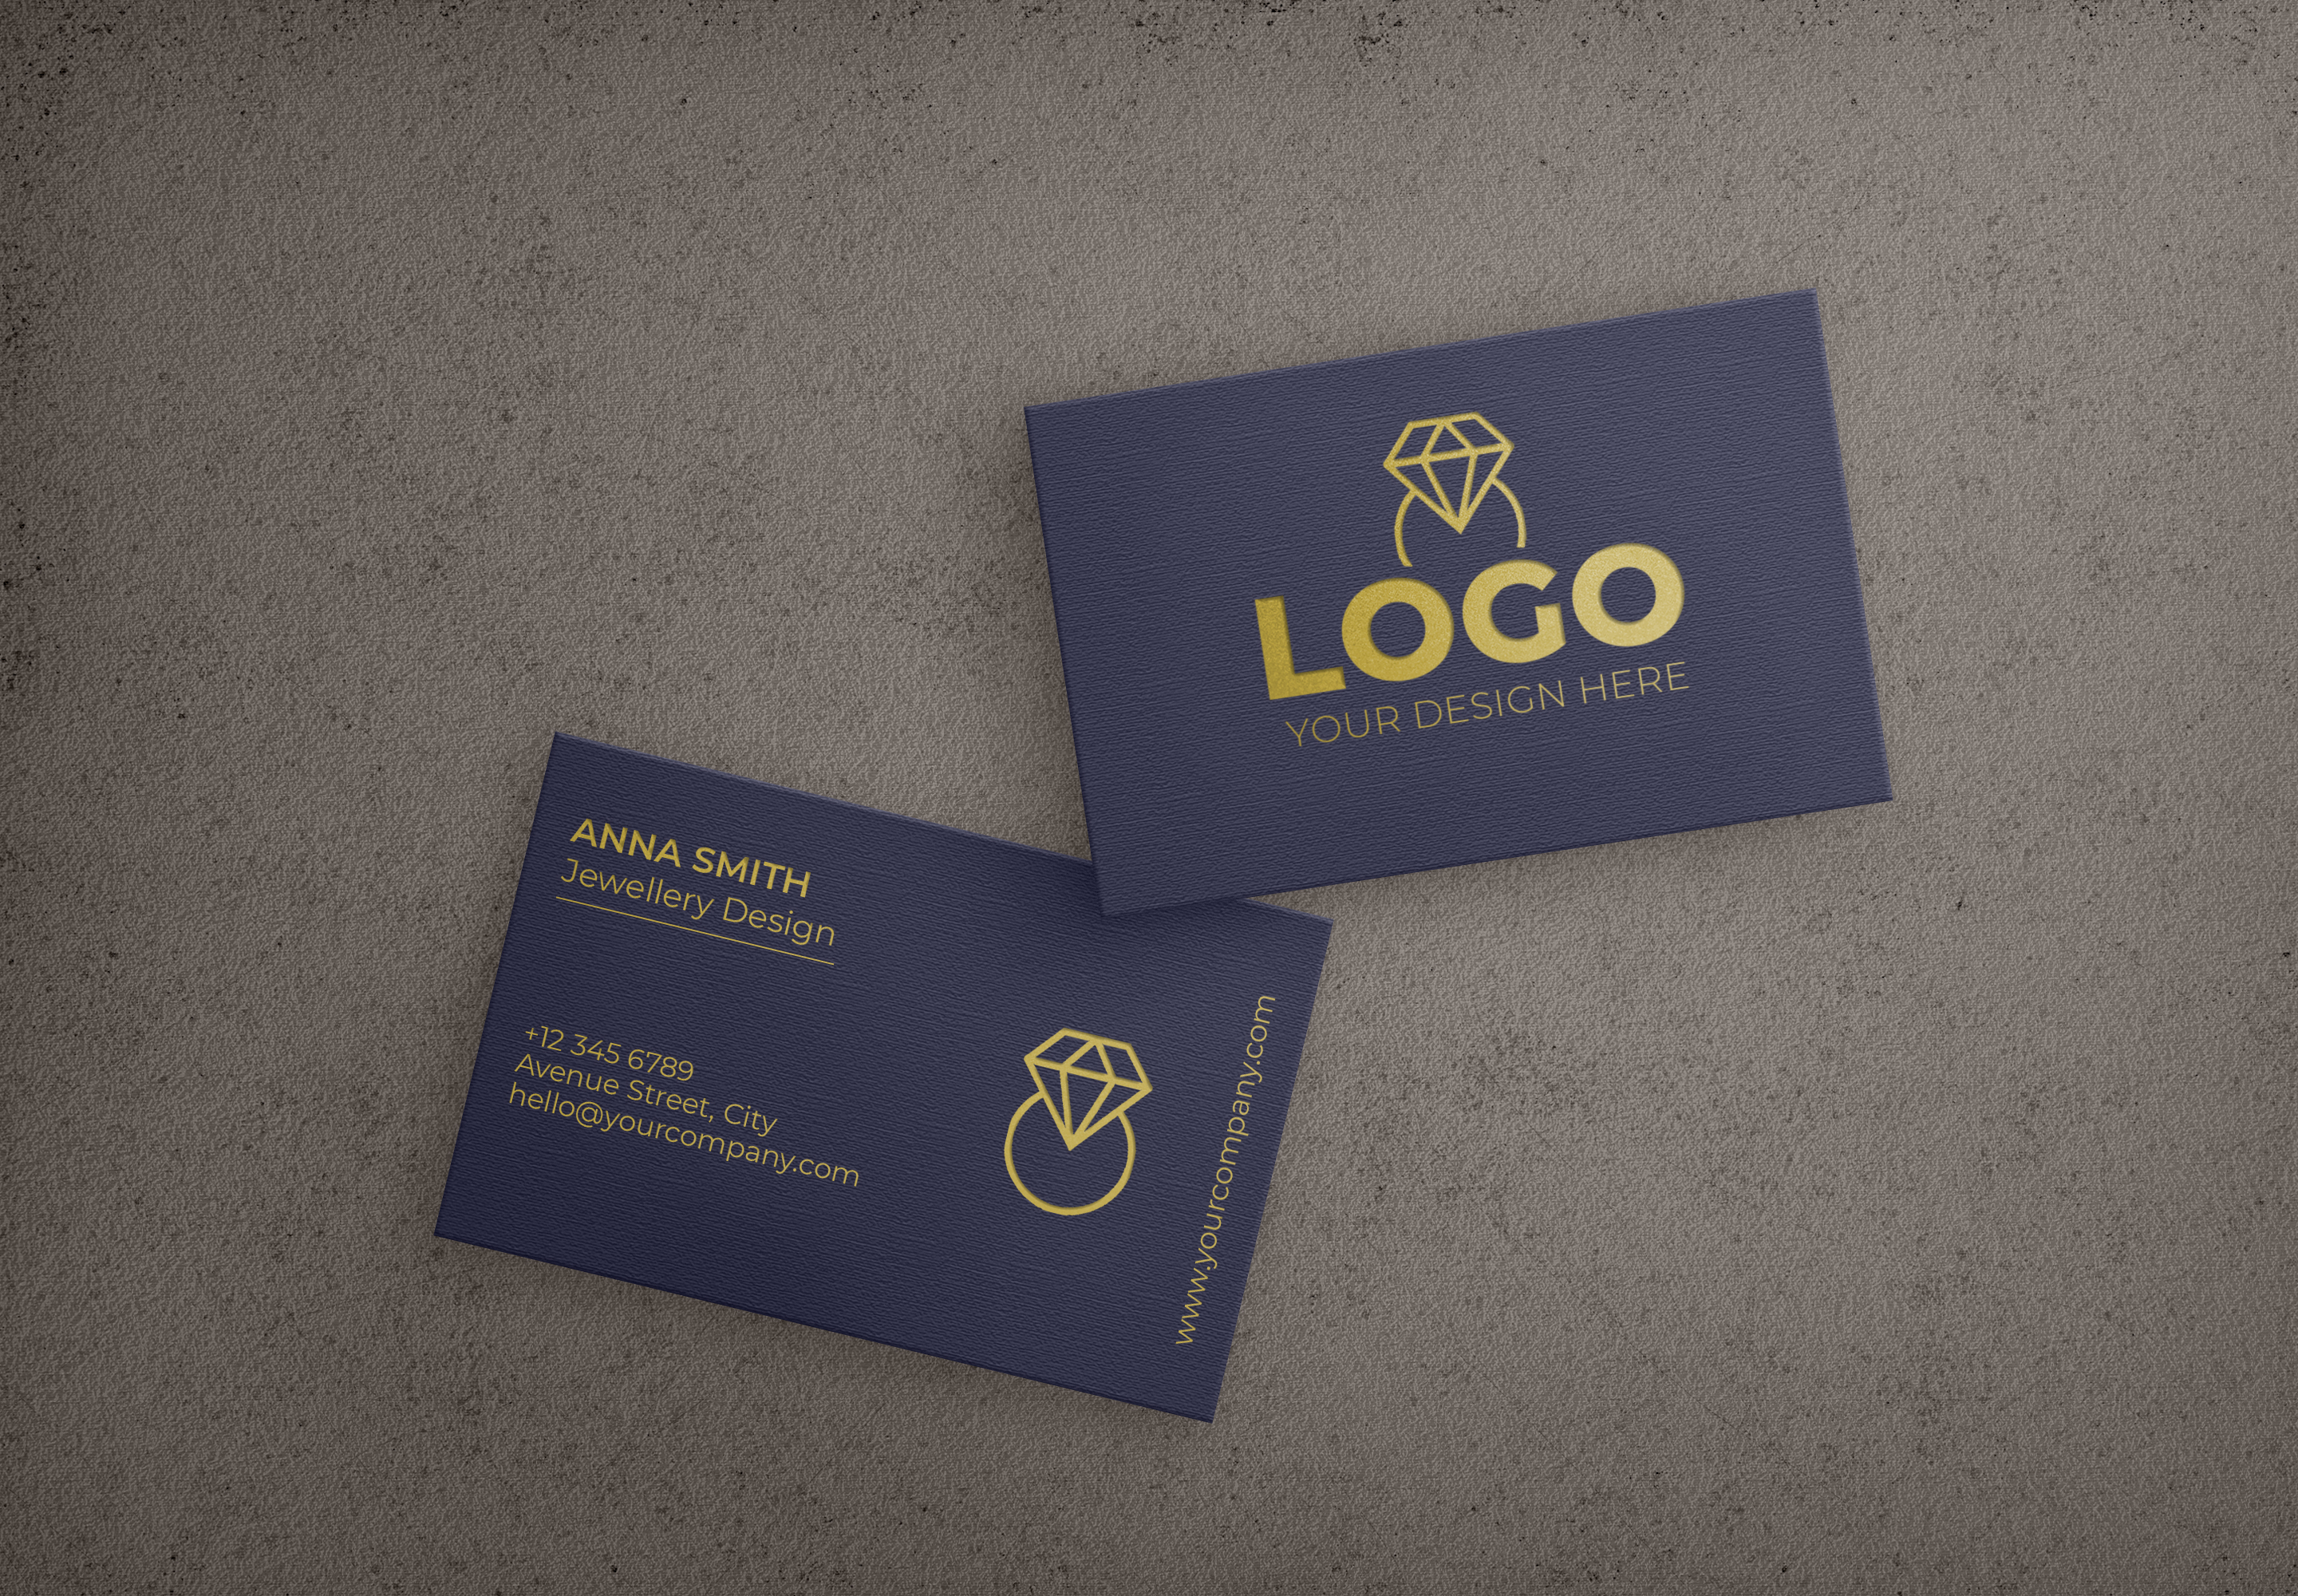 I will create professional business card design ready for print